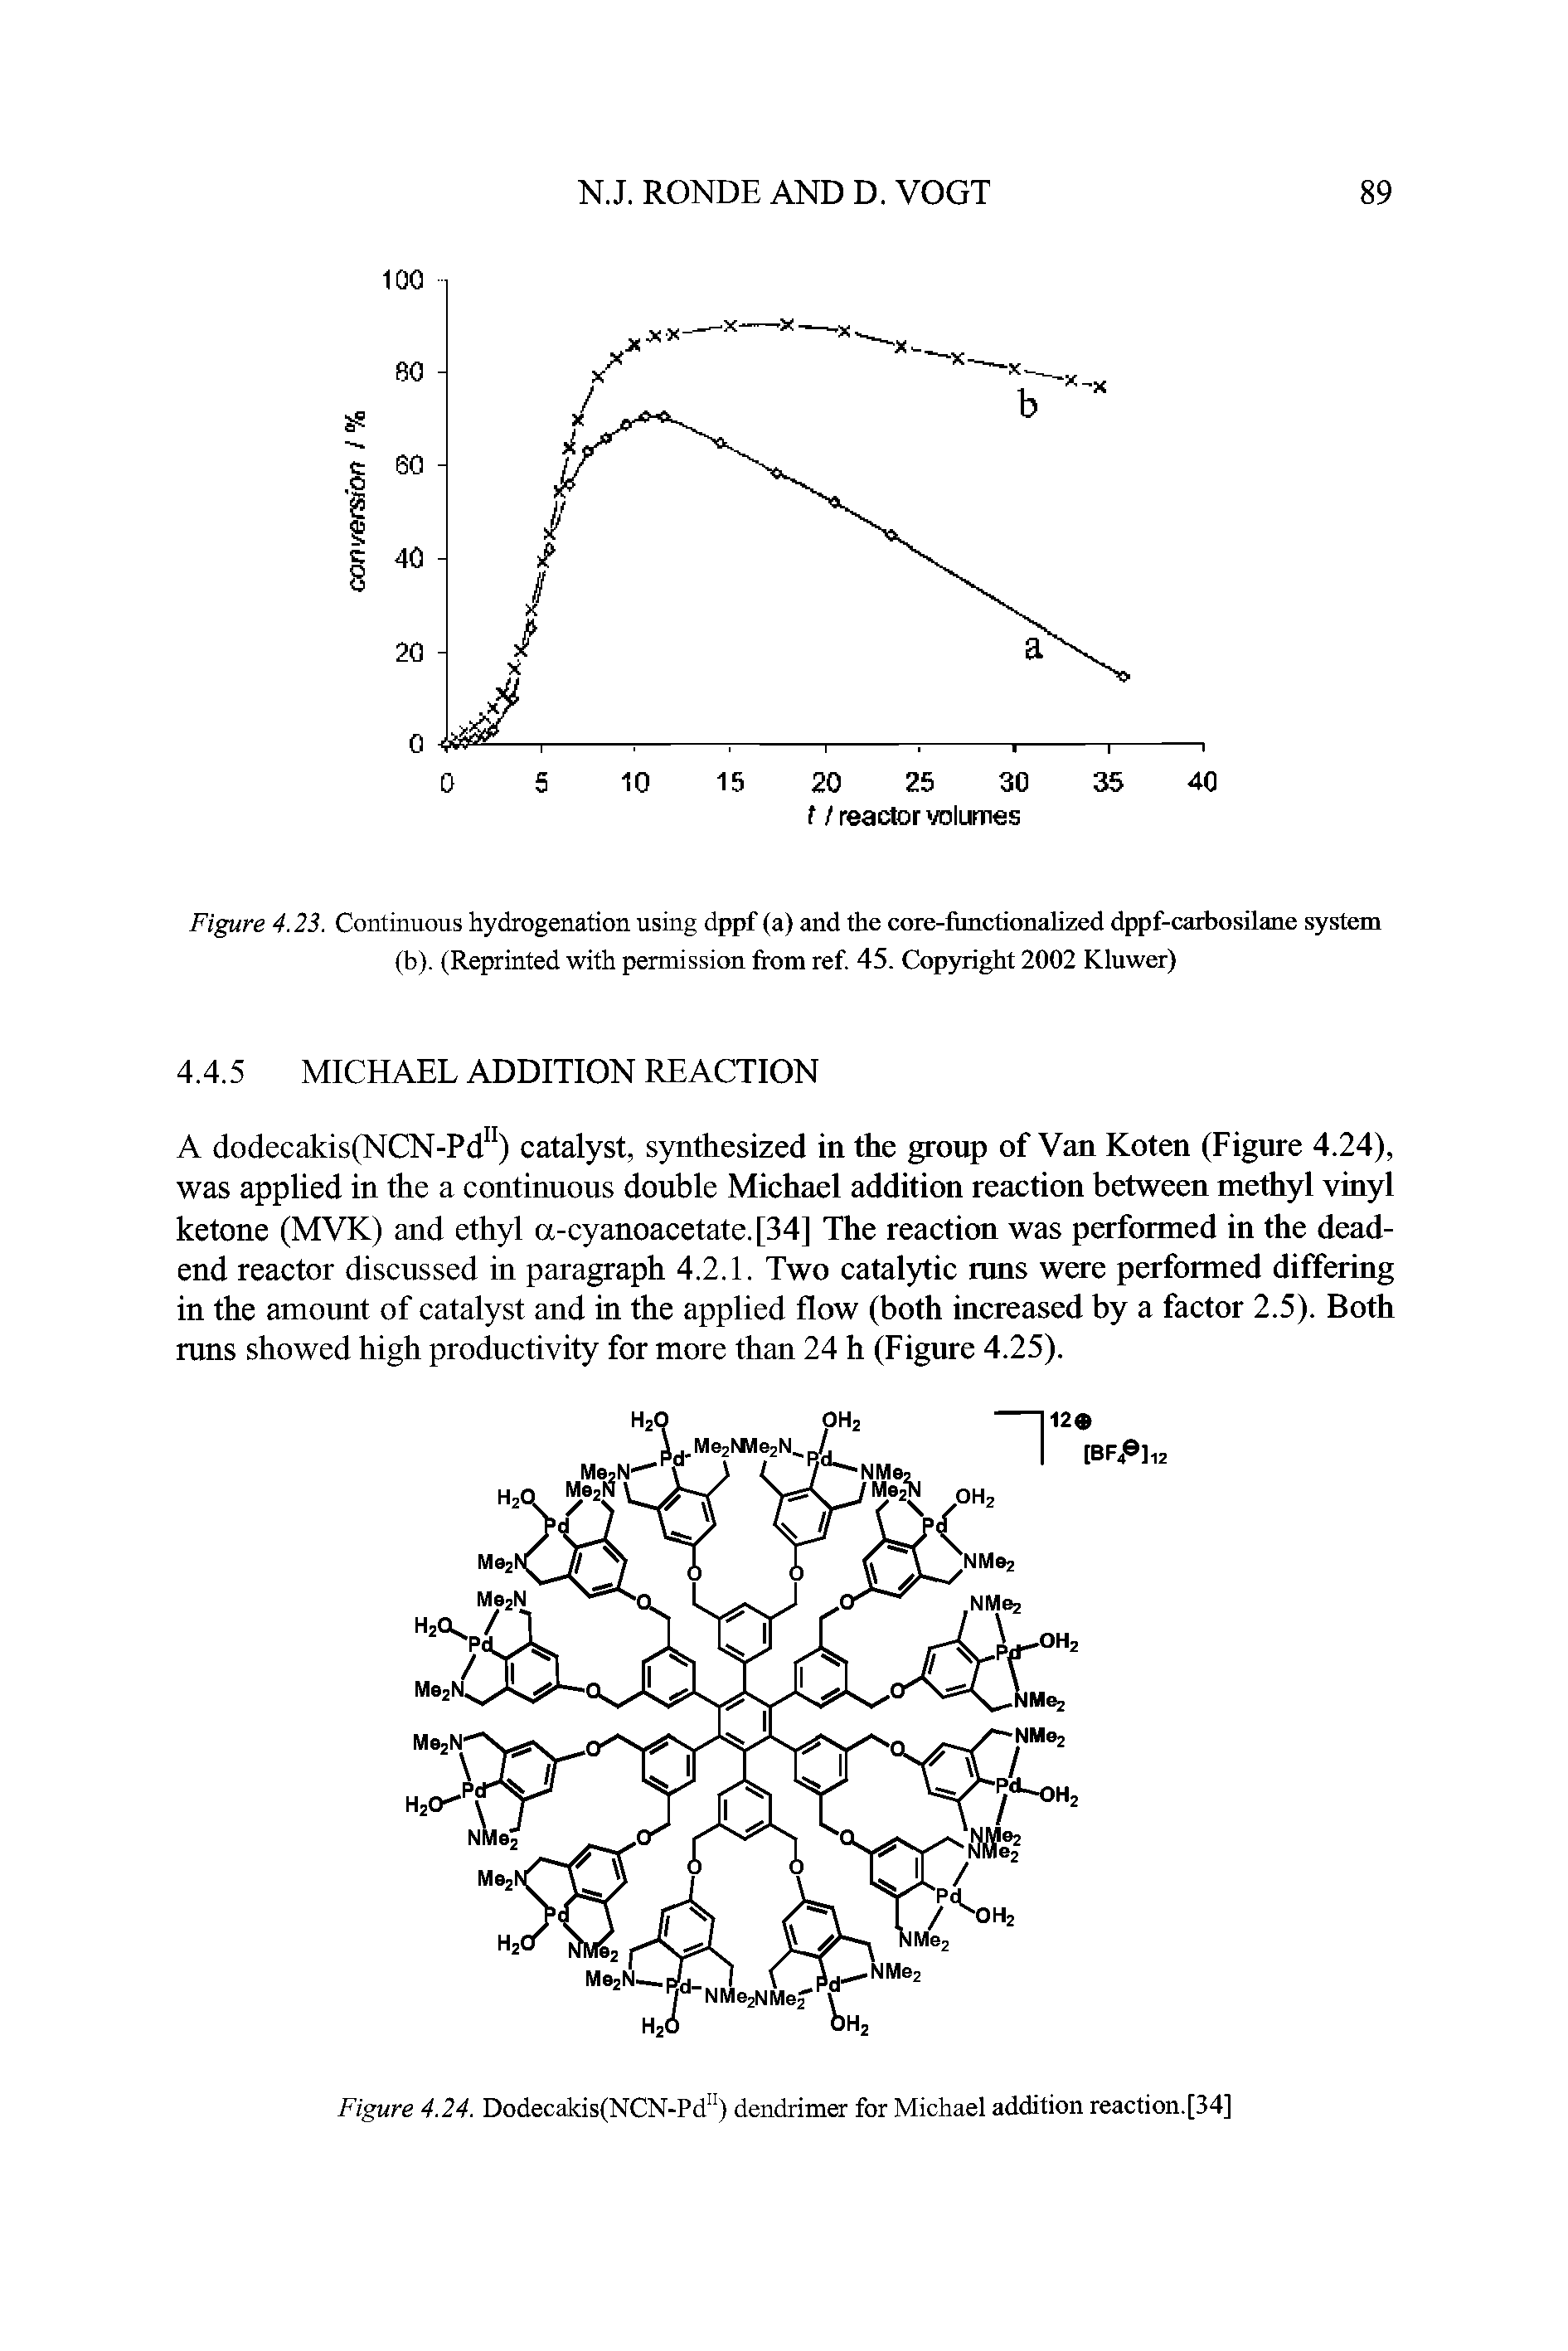 Figure 4.23. Continuous hydrogenation using dppf (a) and the core-functionalized dppf-carbosilane system (b). (Reprinted with permission from ref. 45. Copyright 2002 Kluwer)...